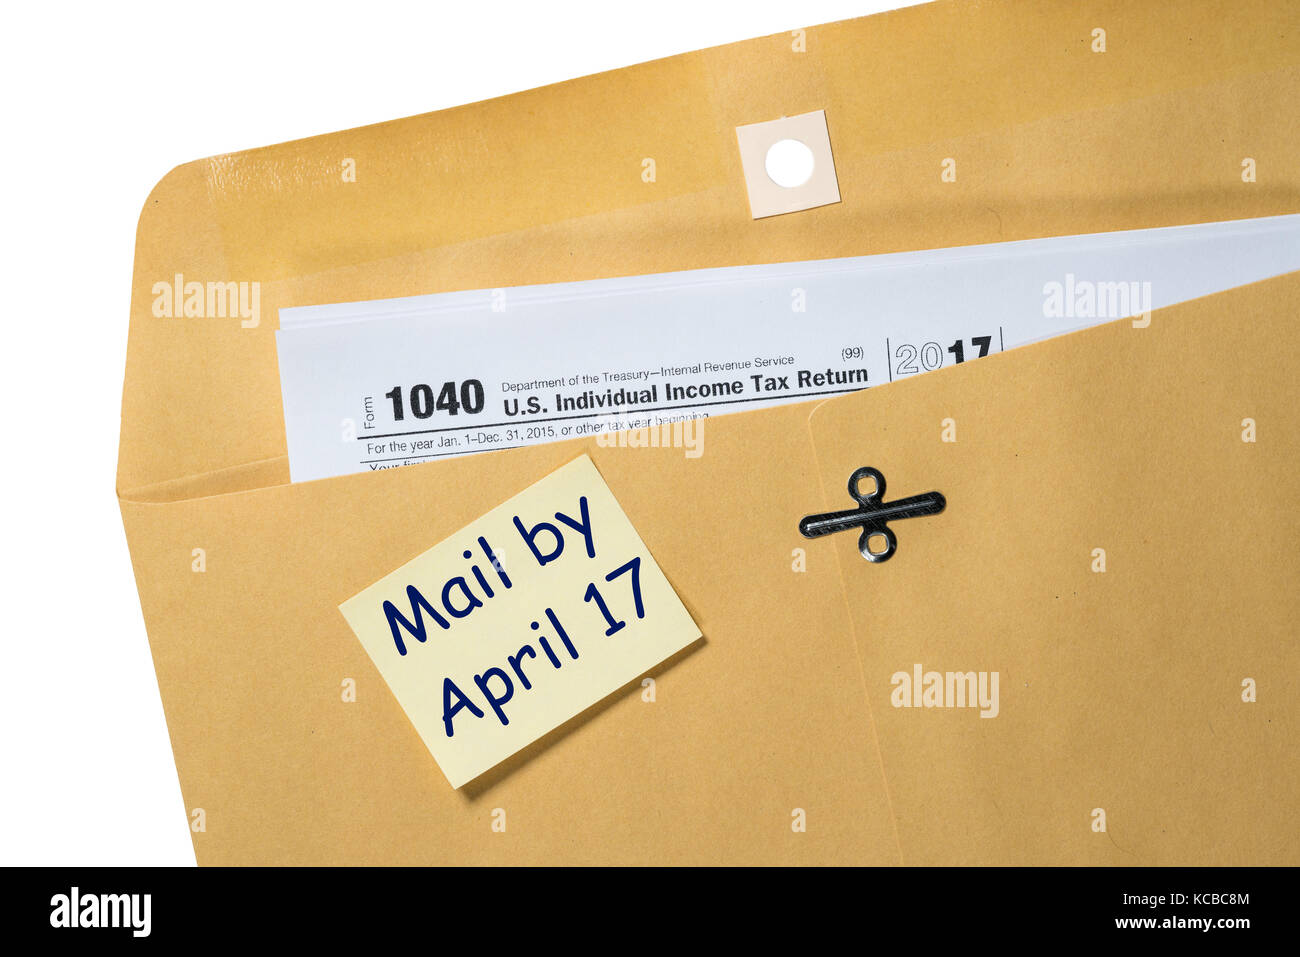 Tax Day reminder for April 17 on envelope Stock Photo